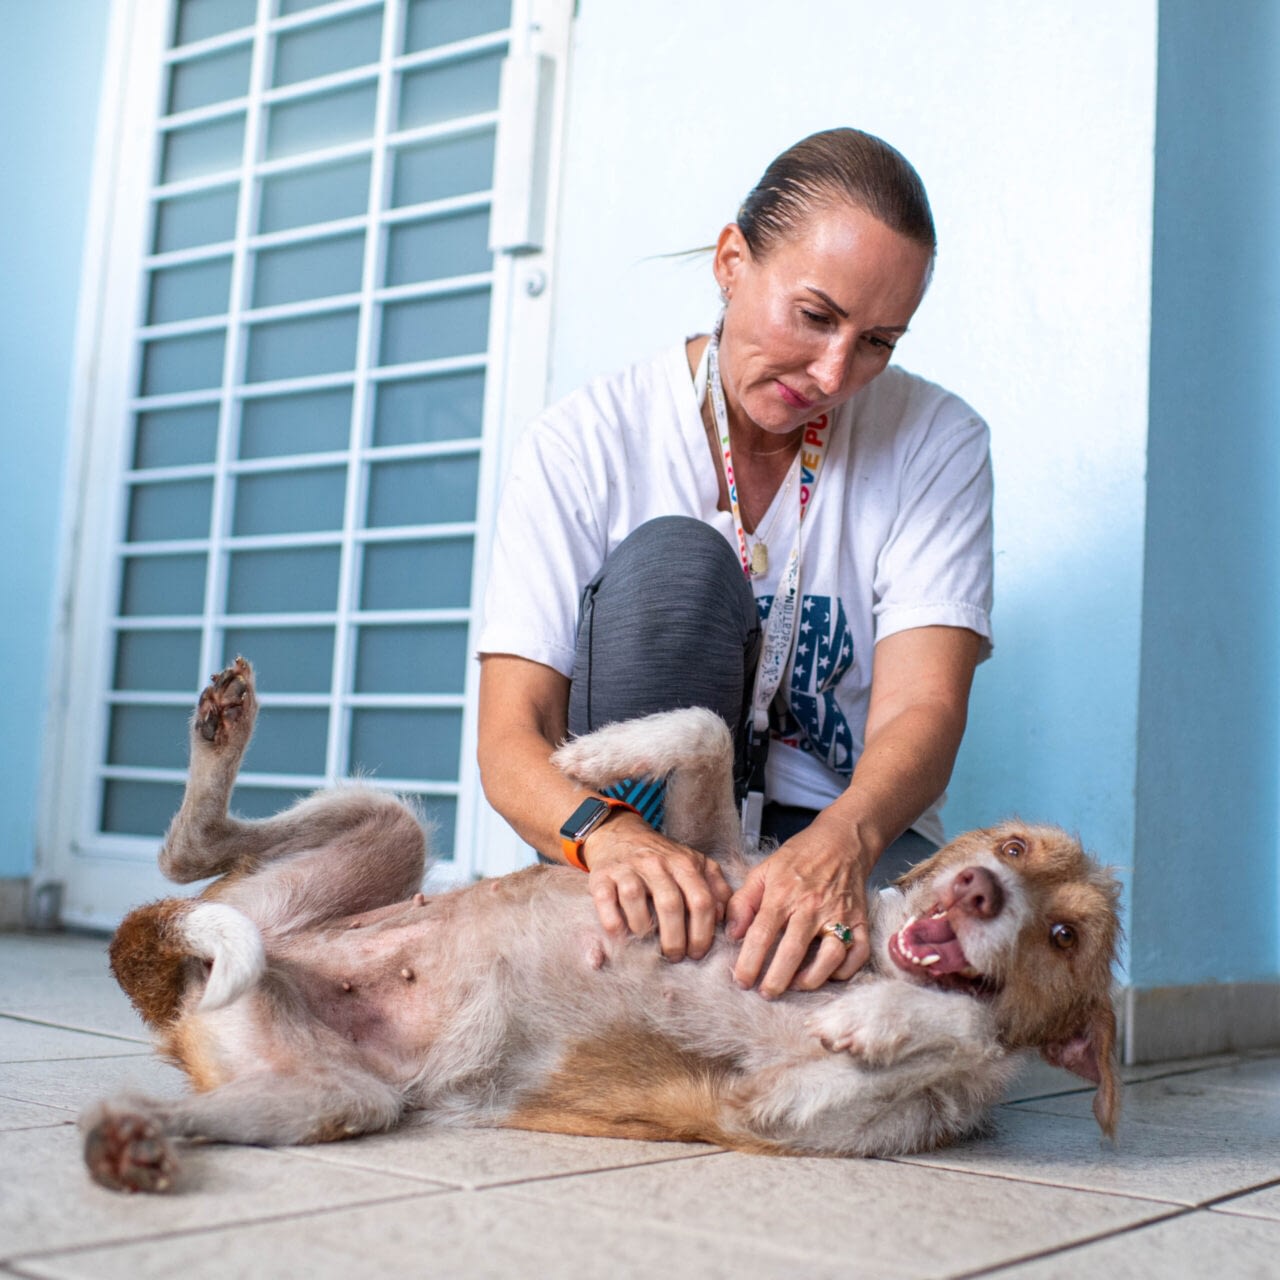 Image: Chrissy Beckles giving one lucky pup some belly scratches